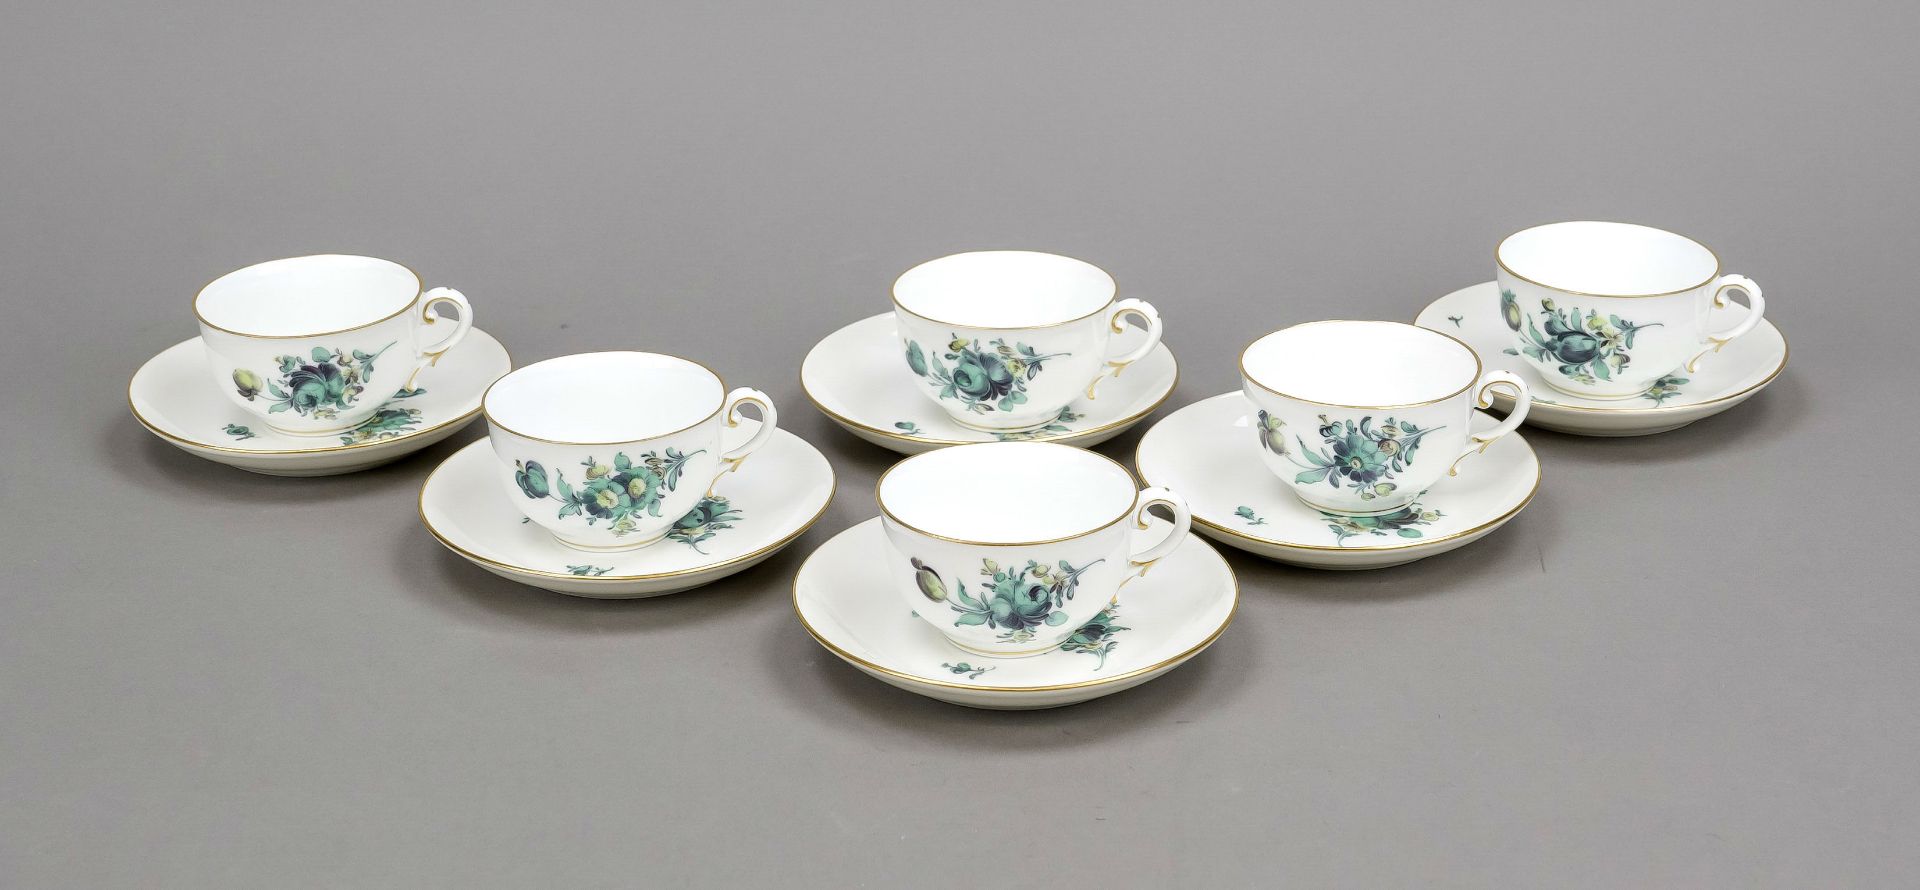 Six demitasse cups with saucer, Nymphenburg, mark 1925-1975, flower painting in copper green and